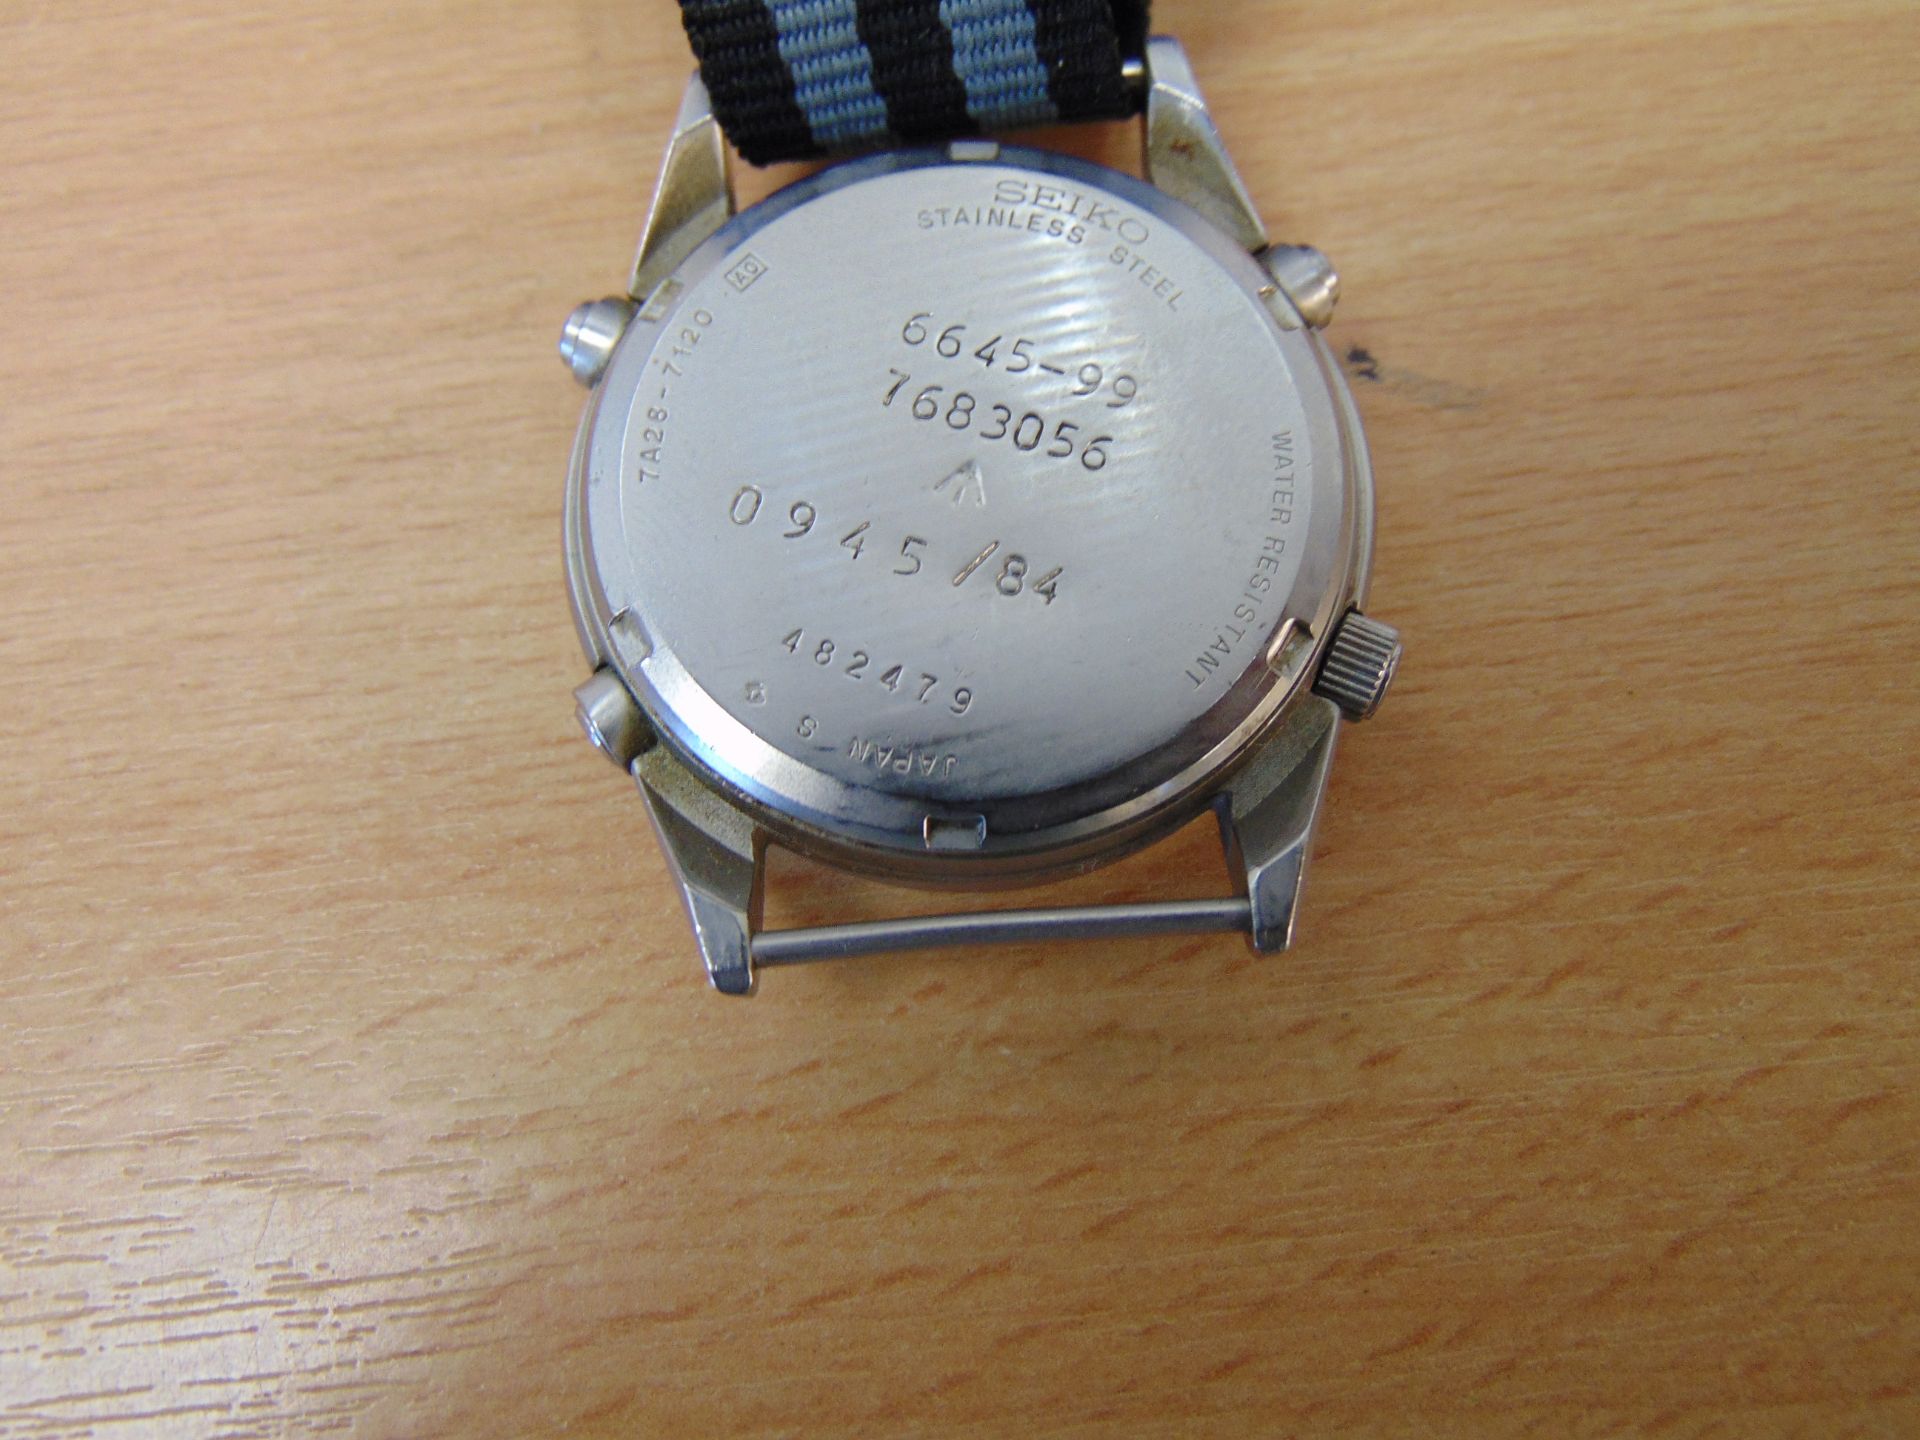 Rare Gen 1 Seiko RAF Pilots Chrono Harrier Force Issue Nato Marks, Dated 1984 - Image 3 of 4